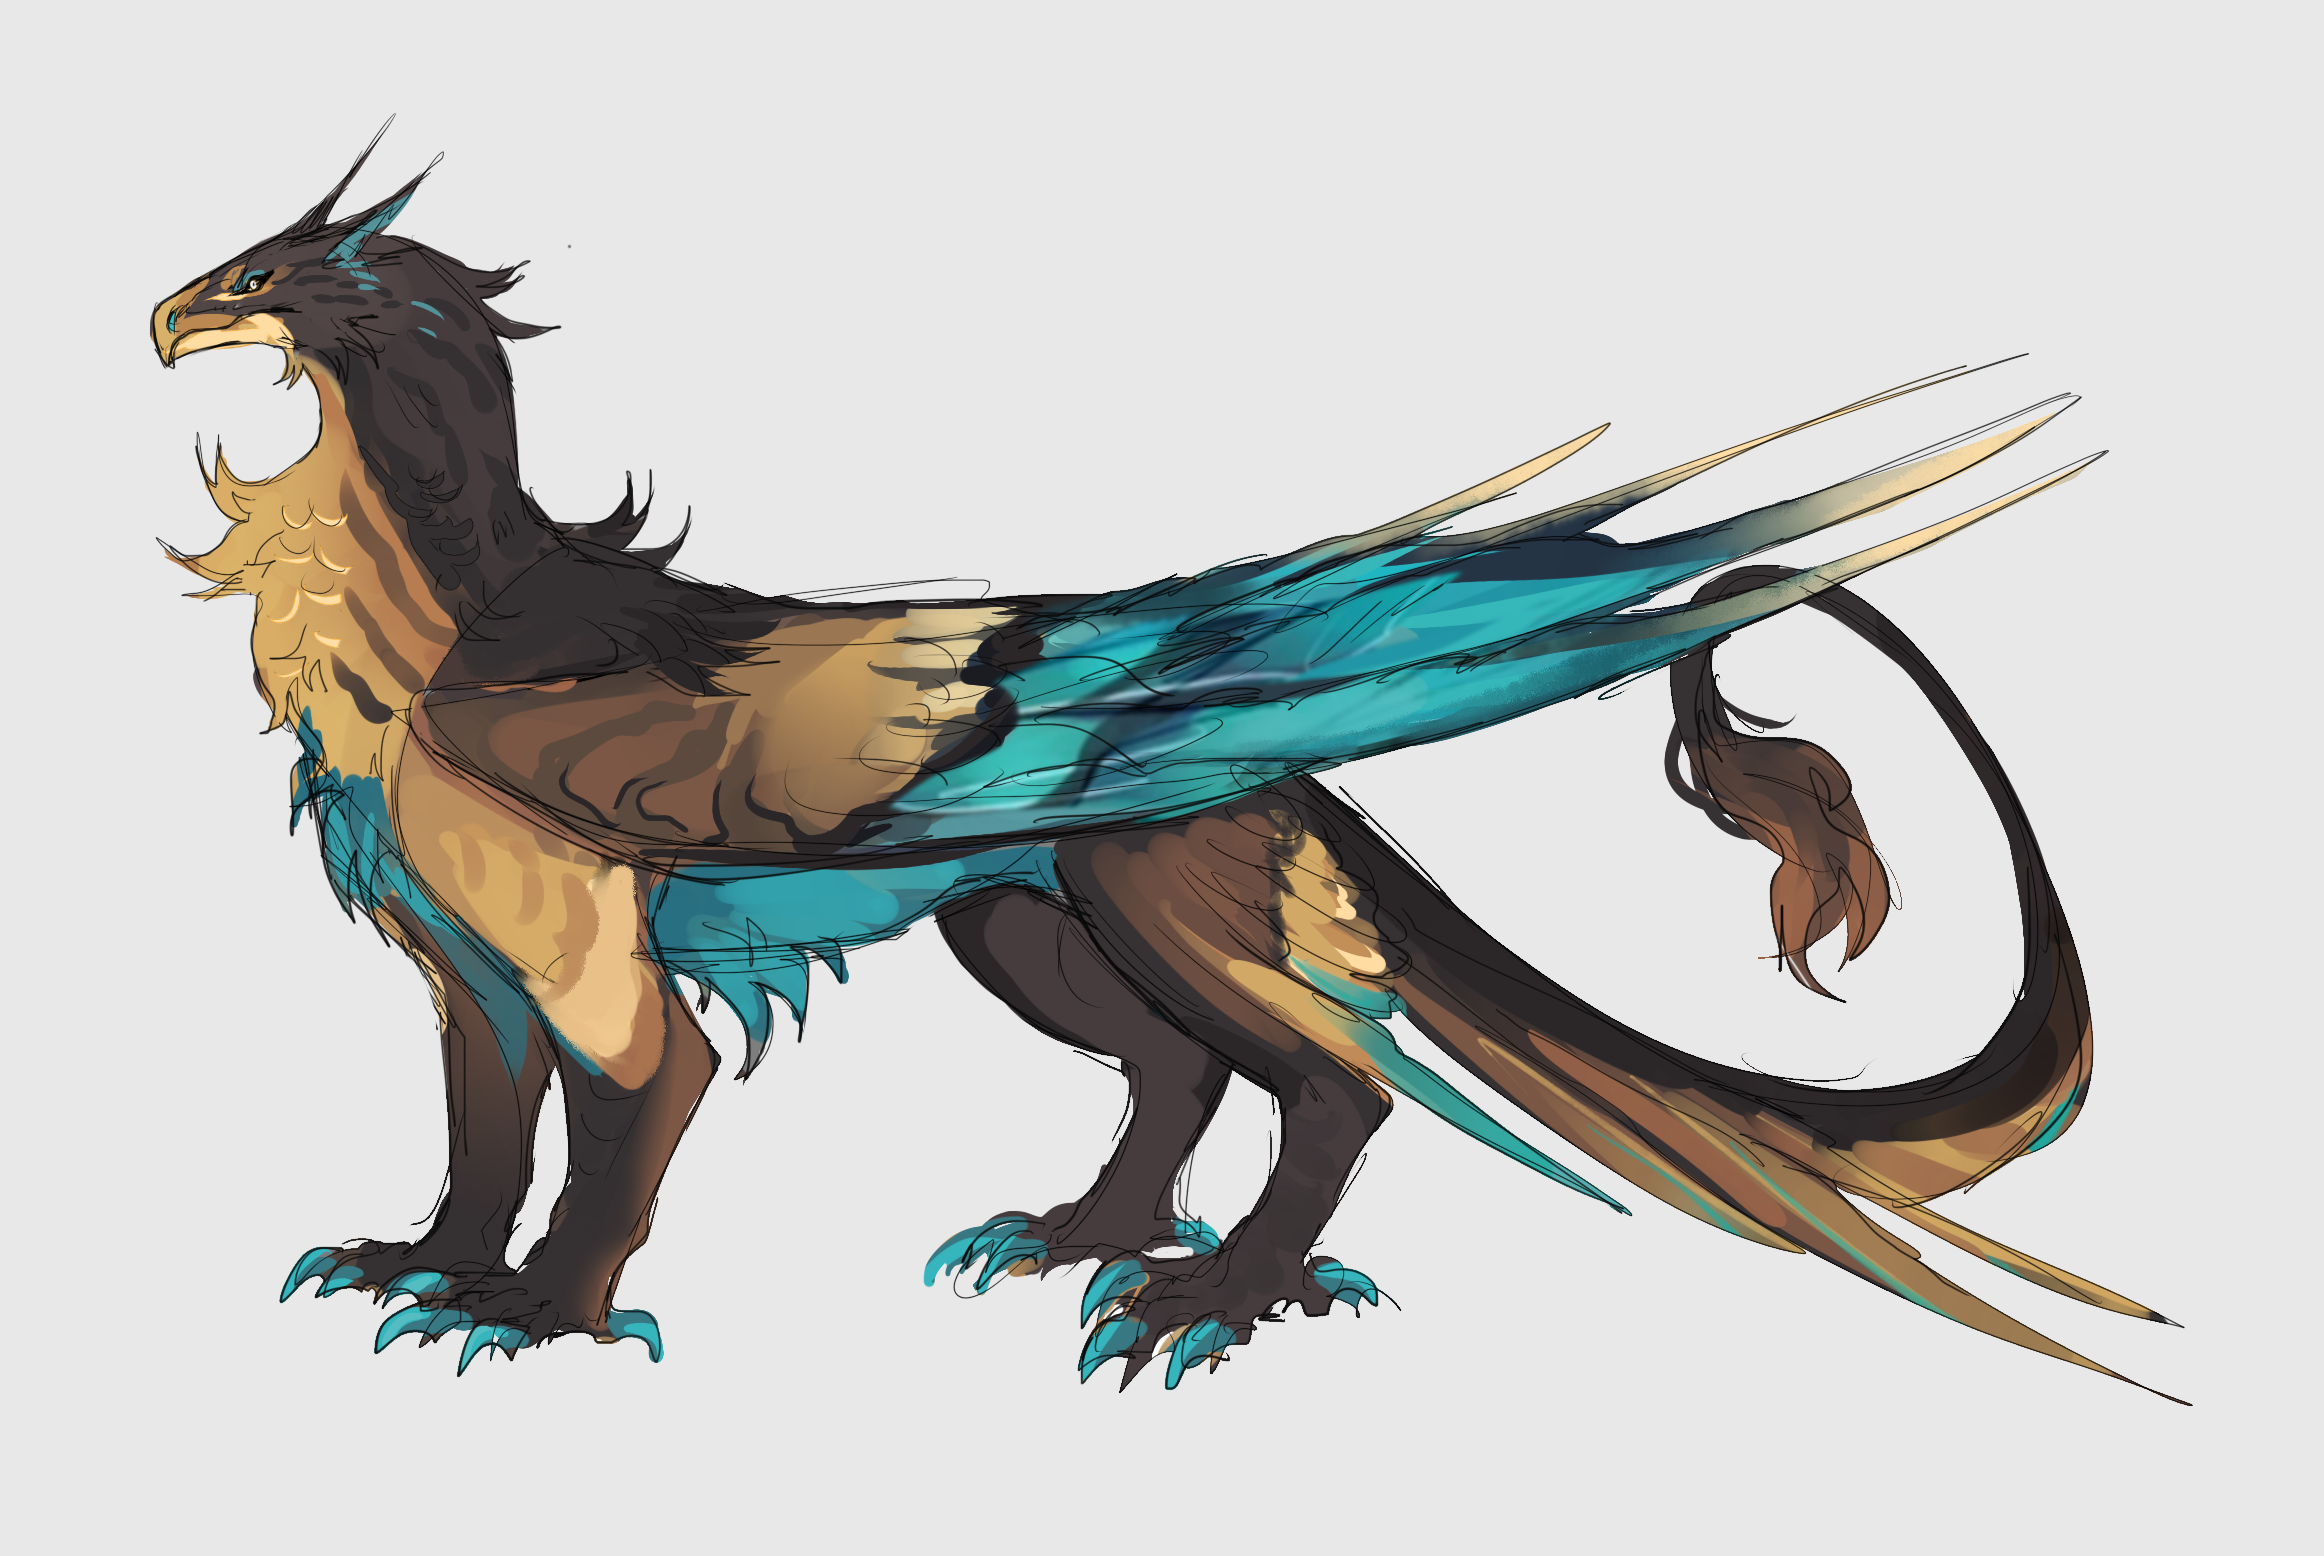 gryphon by Meillyria on DeviantArt